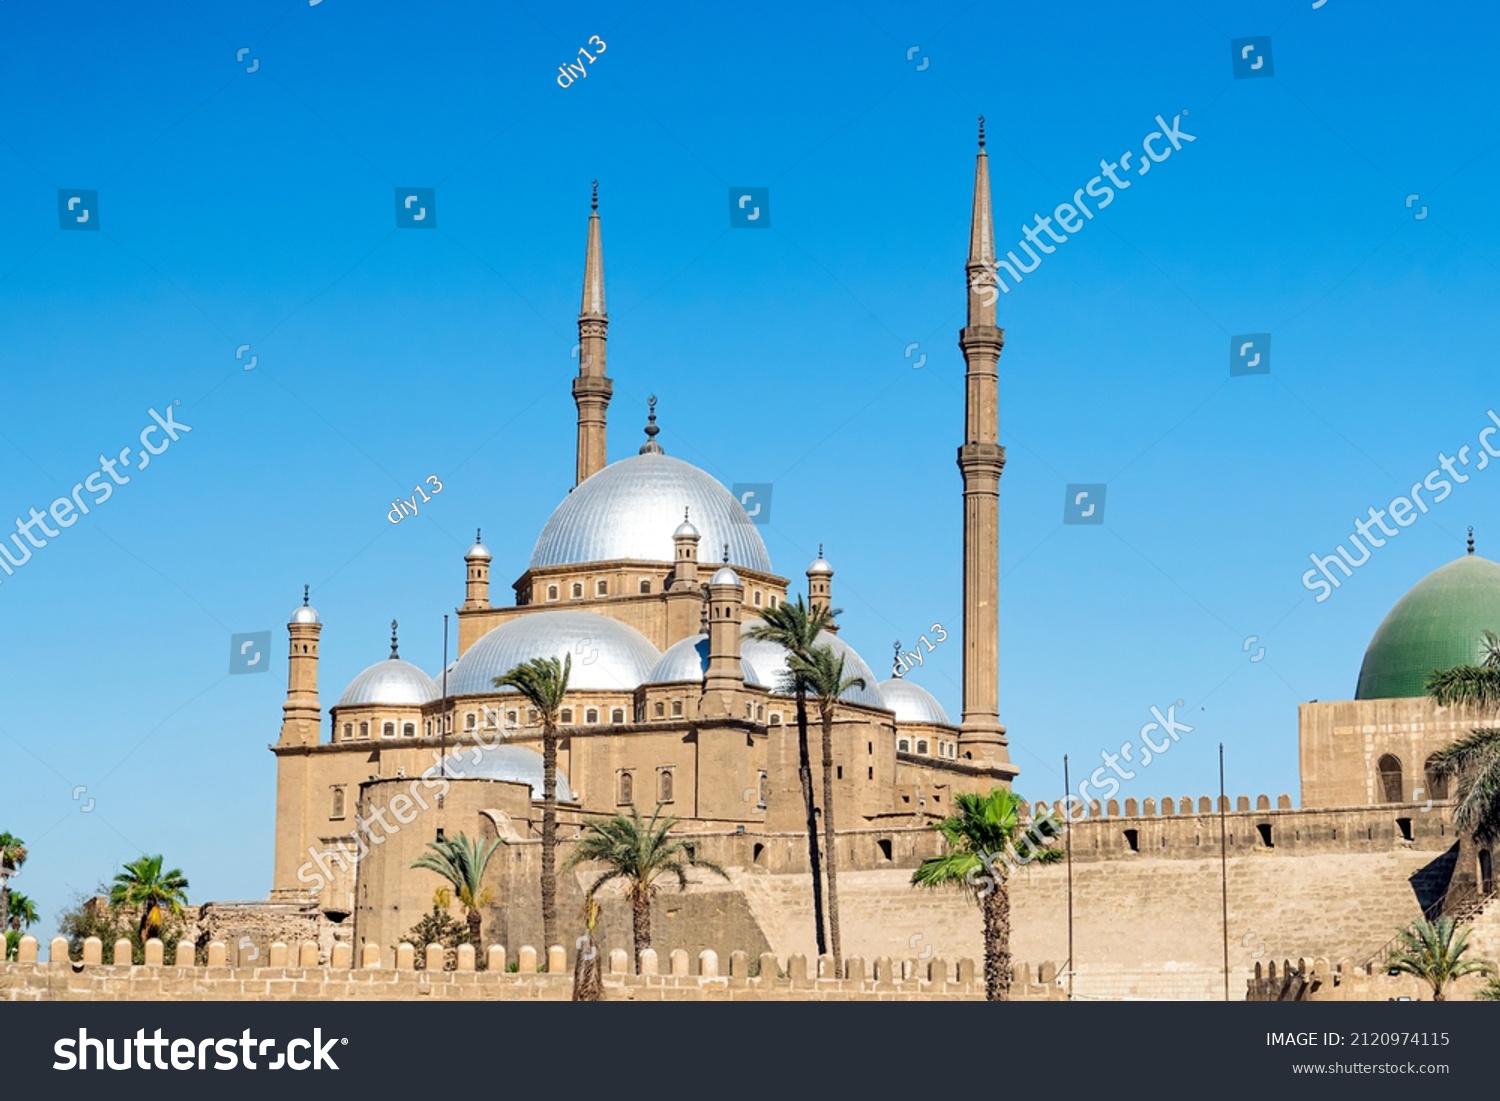 Egypt. Cairo. The Saladin Citadel - the Mosque of Muhammad Ali or Mohamed Ali Pasha, also known as the Alabaster Mosque #2120974115